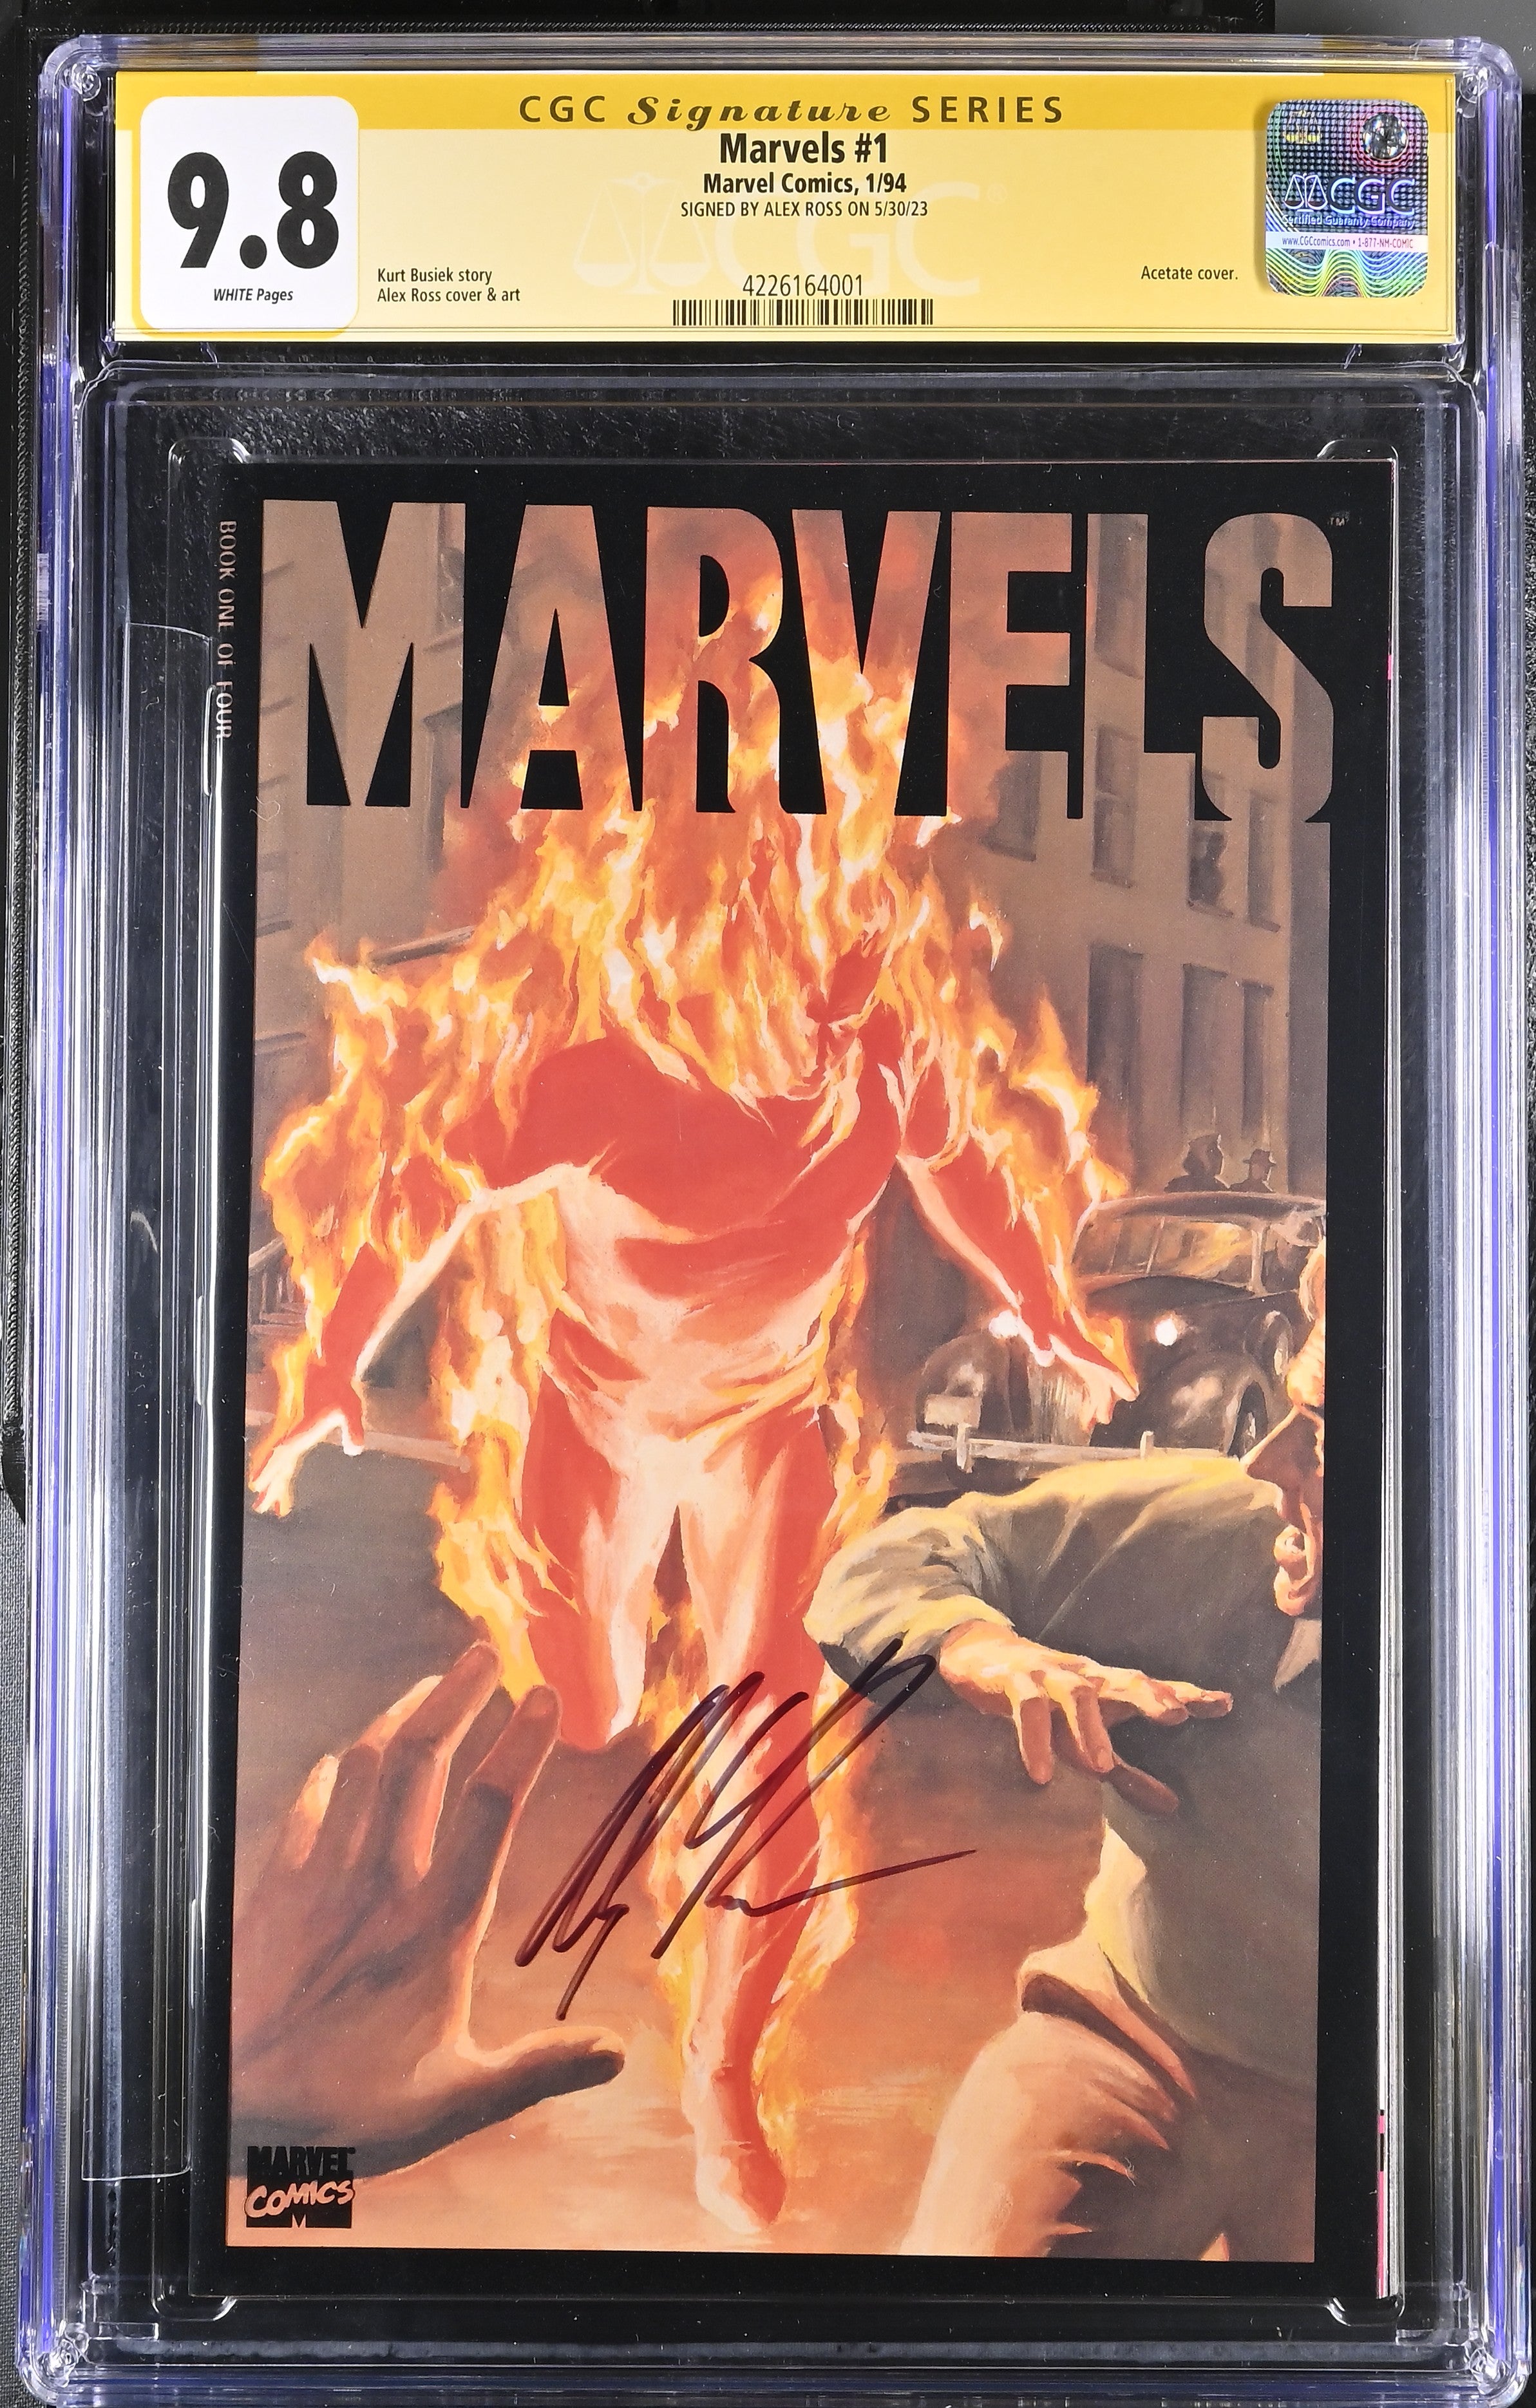 Marvels #1 (1994) CGC 9.8 Signed by Alex Ross Acetate Cover